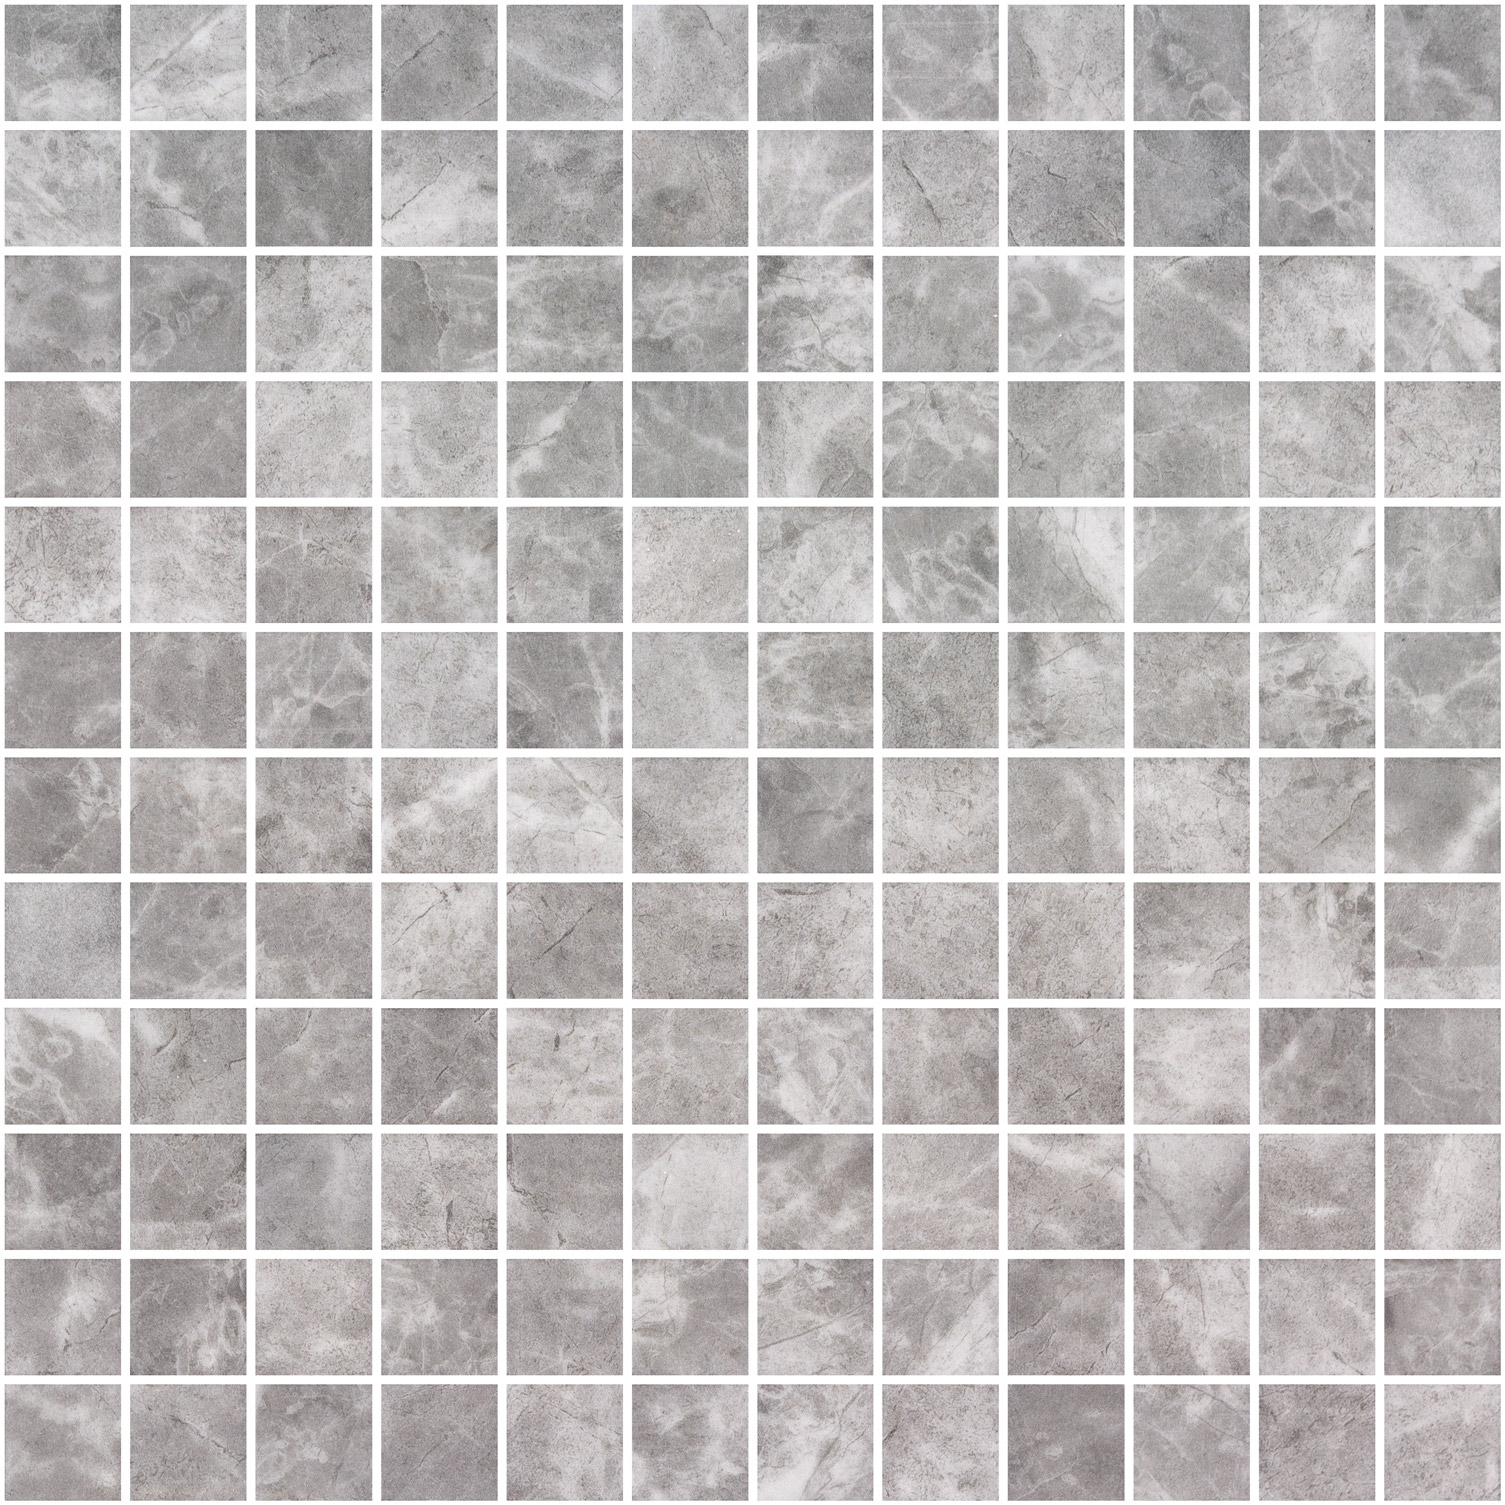 SILVER MATTE_RMS TRADERS_NATURAL STONE POOL MOSAIC SUPPLIER MELBOURNE (1)